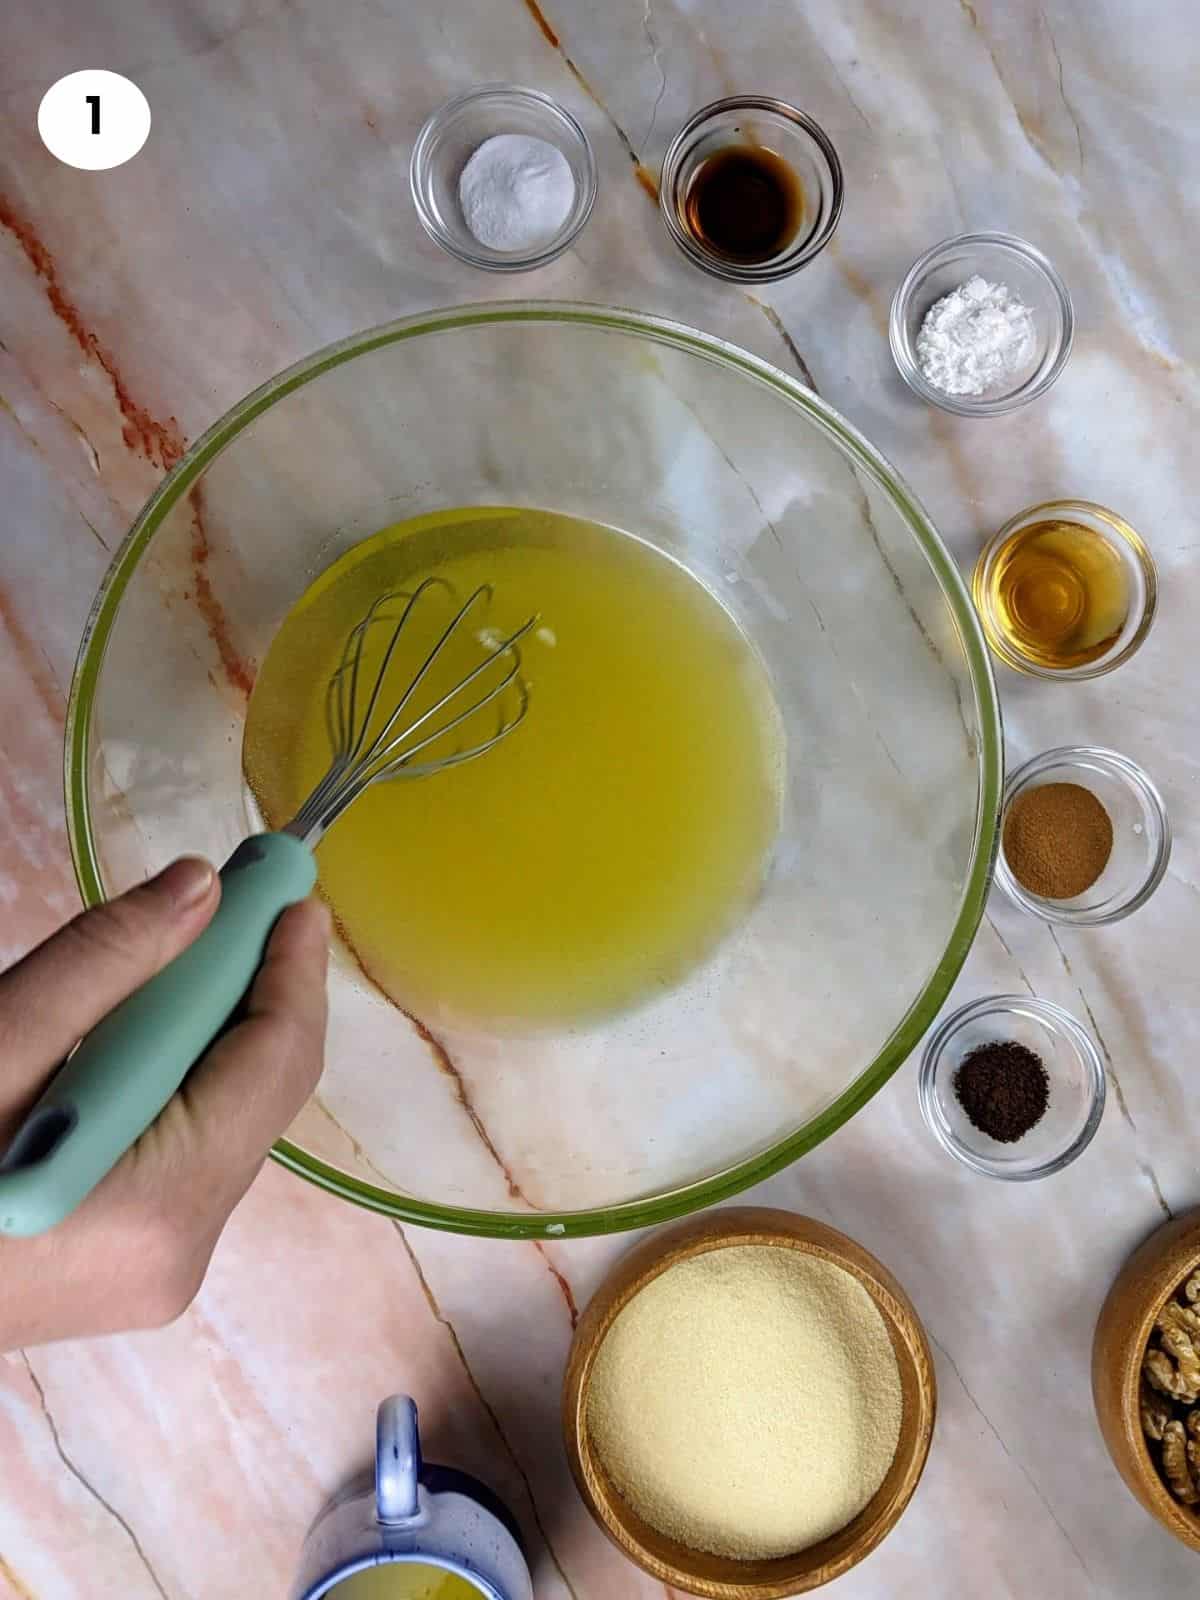 Mixing the olive oil and sugar.